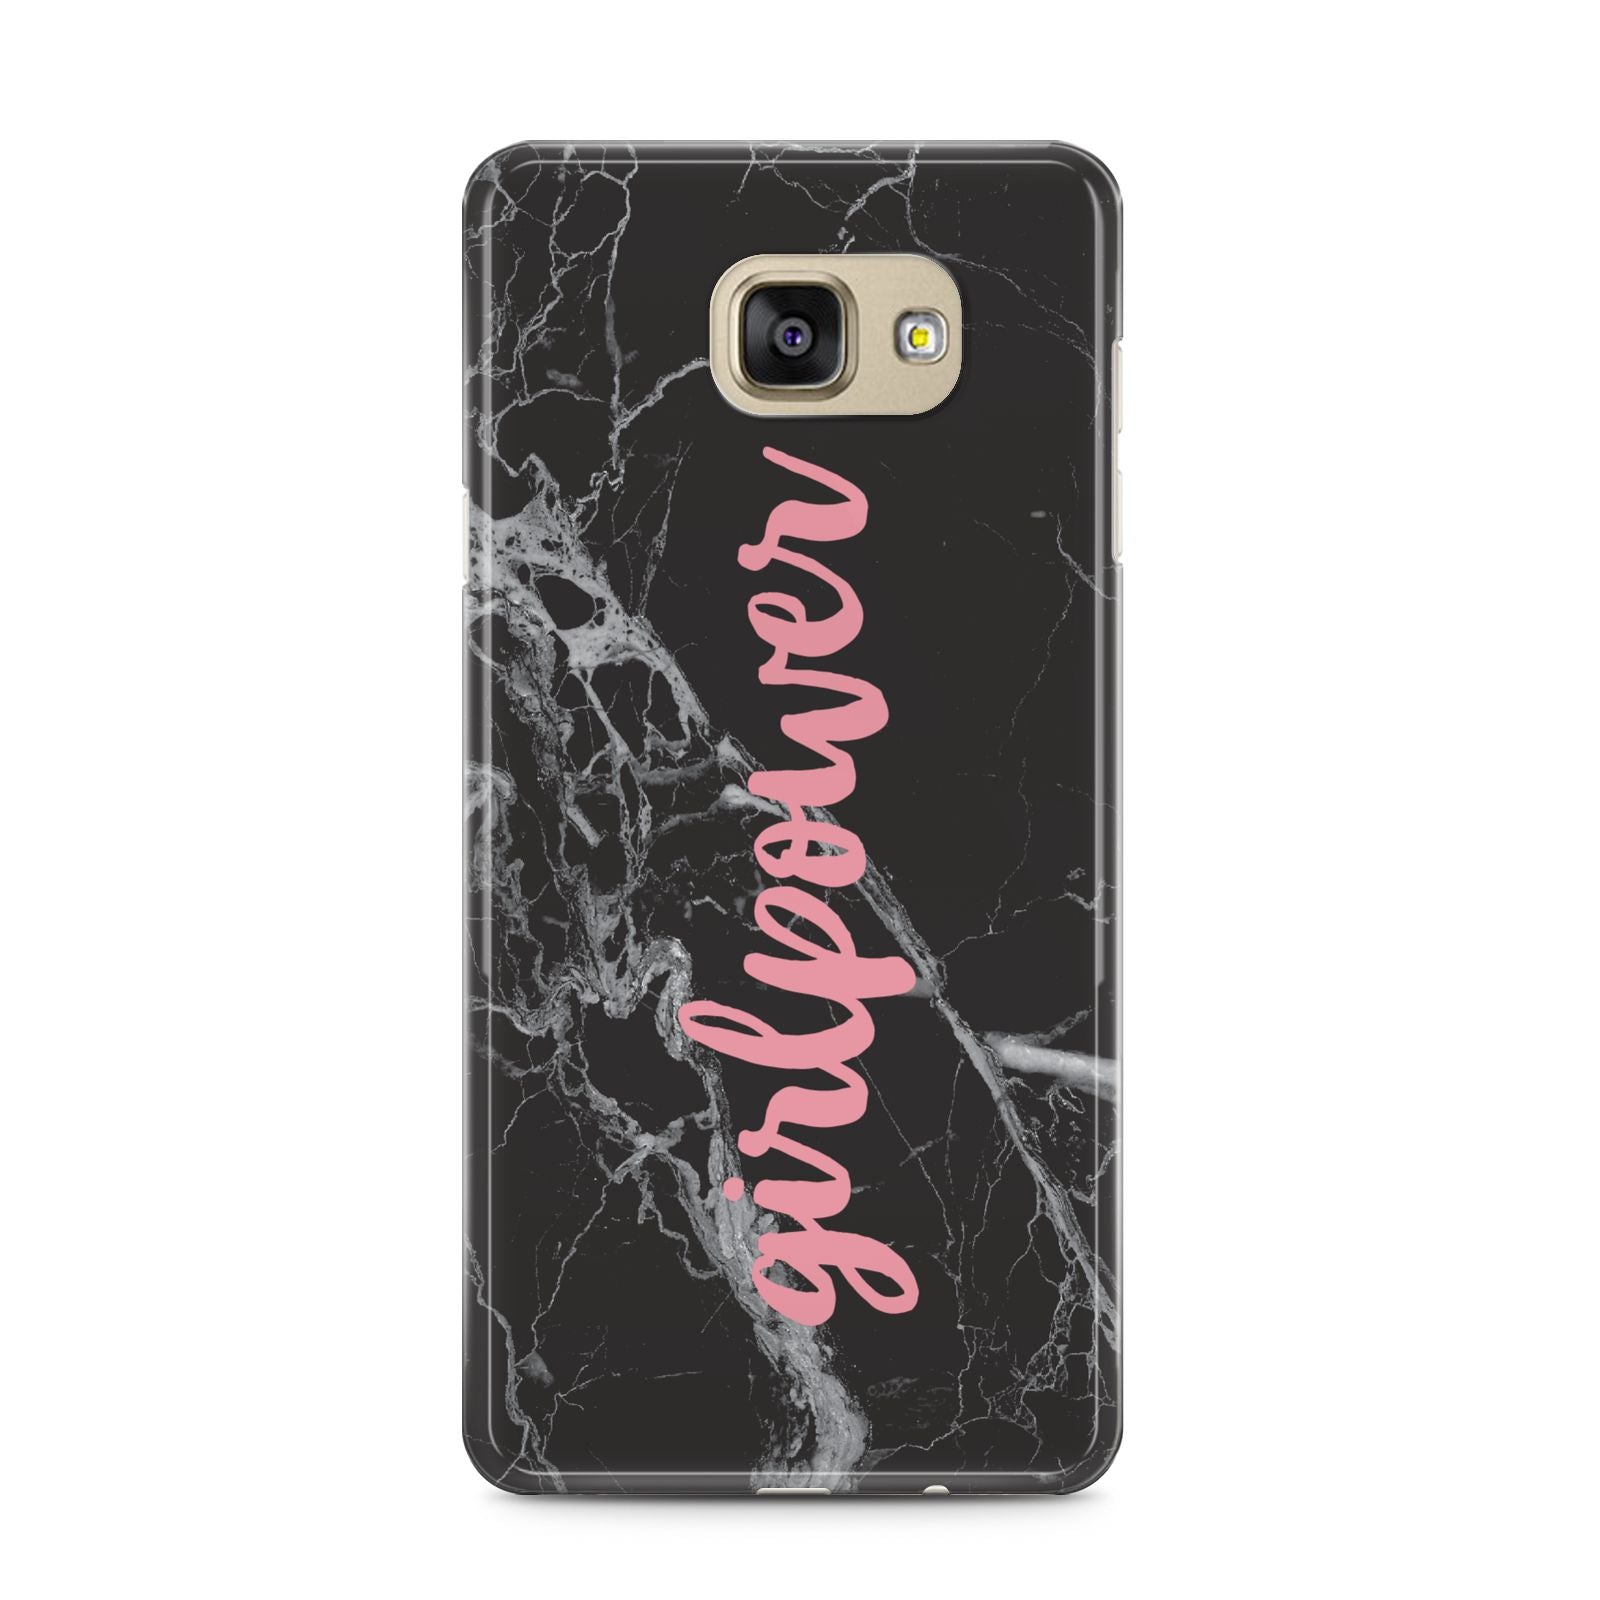 Girlpower Black White Marble Effect Samsung Galaxy A5 2016 Case on gold phone